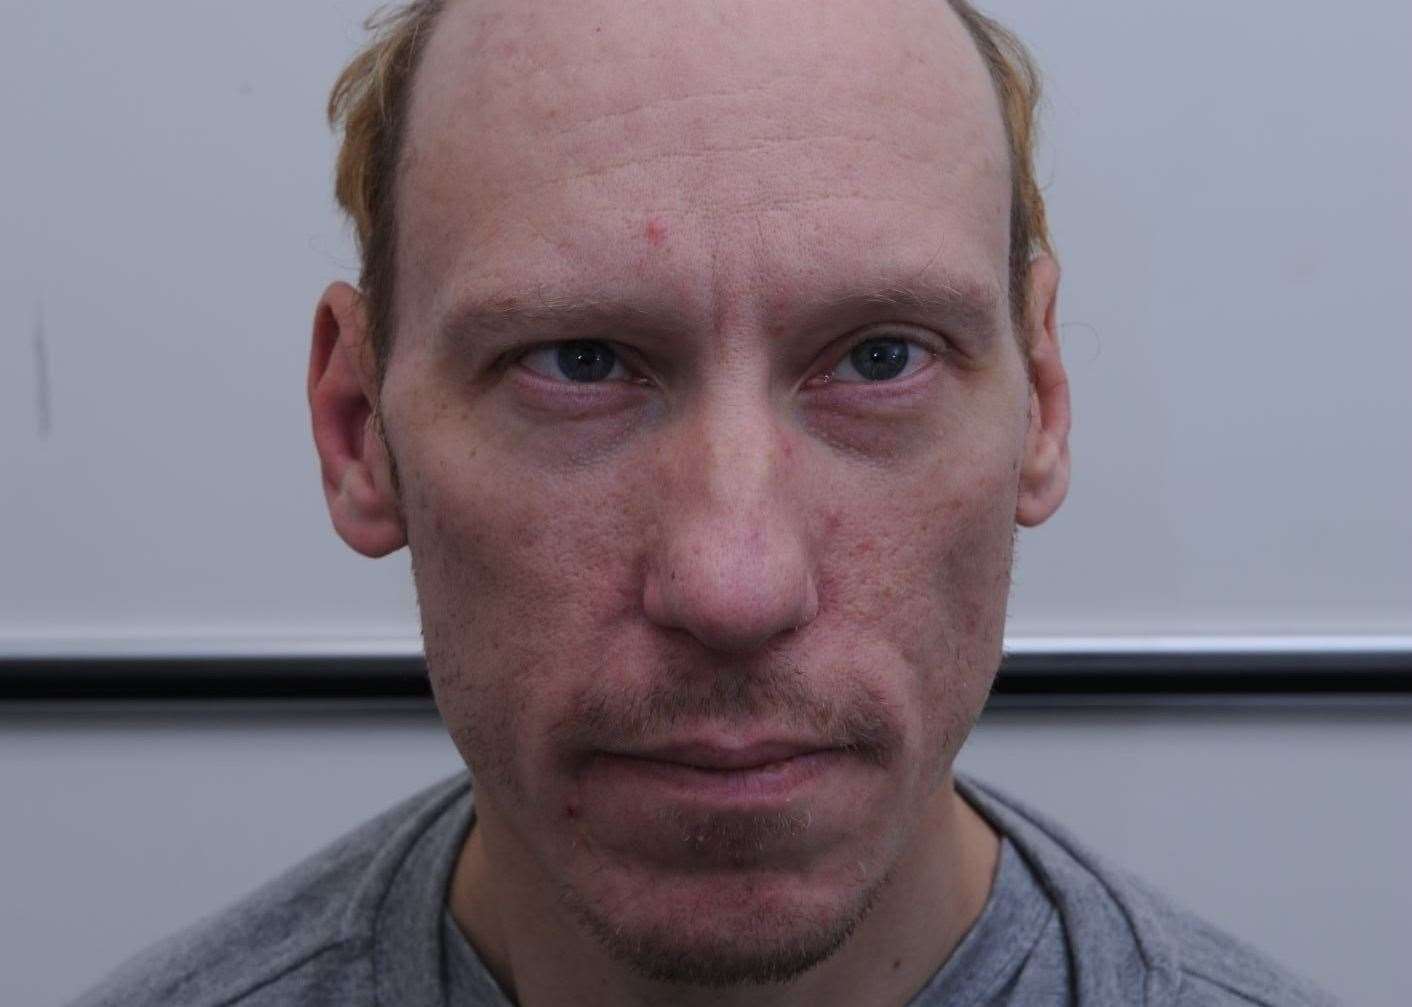 Stephen Port murdered four people and raped even more